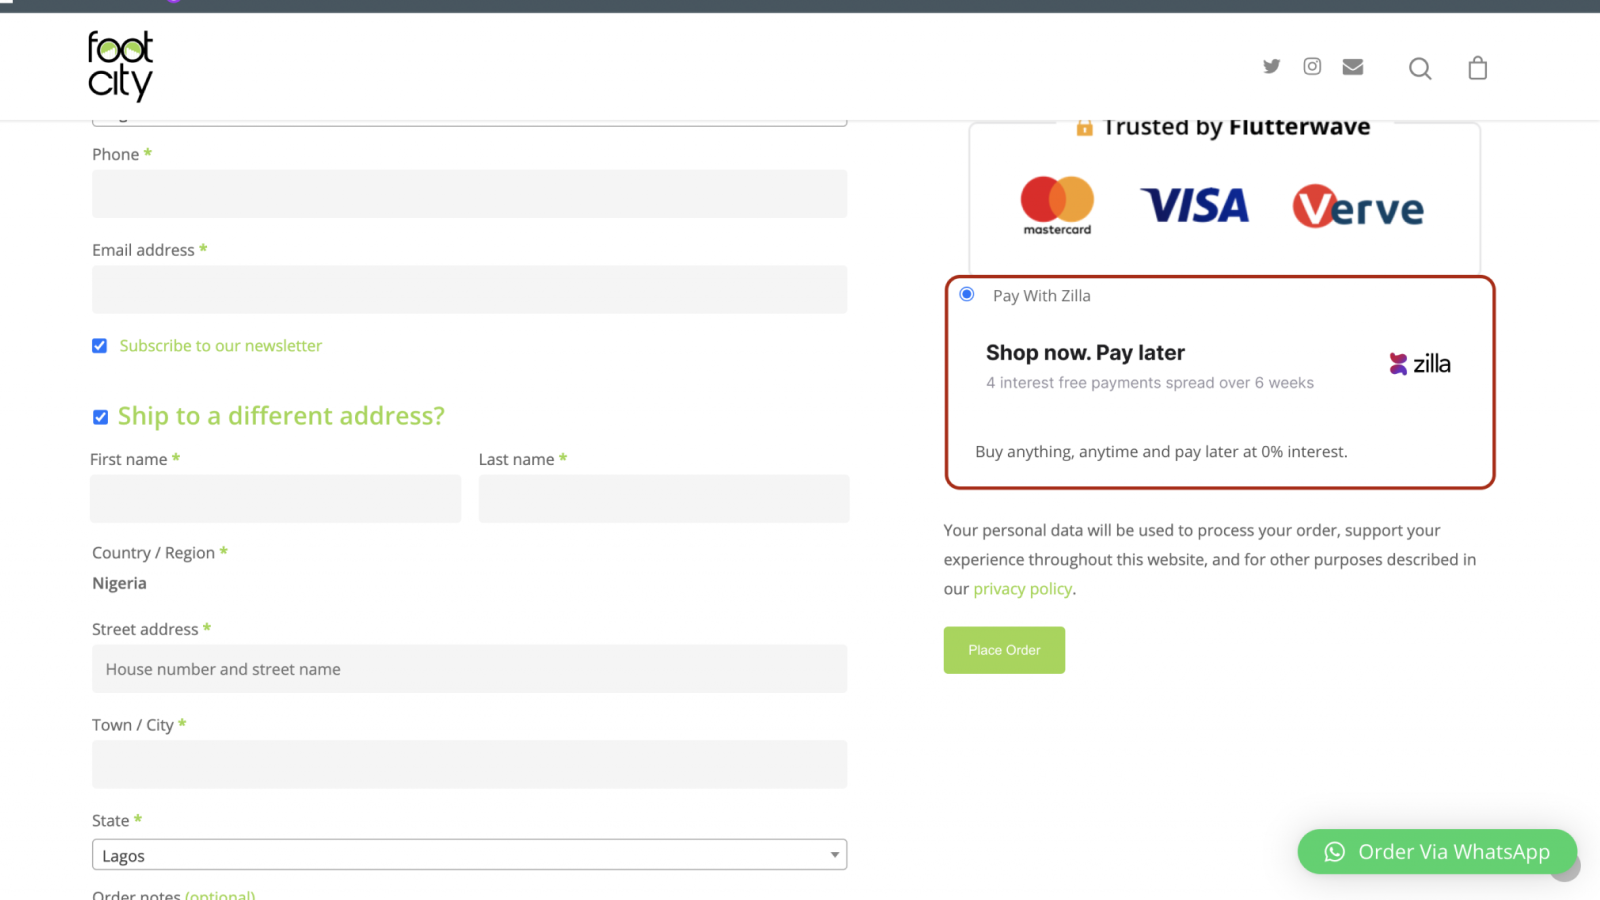 Pay with Zilla payment option